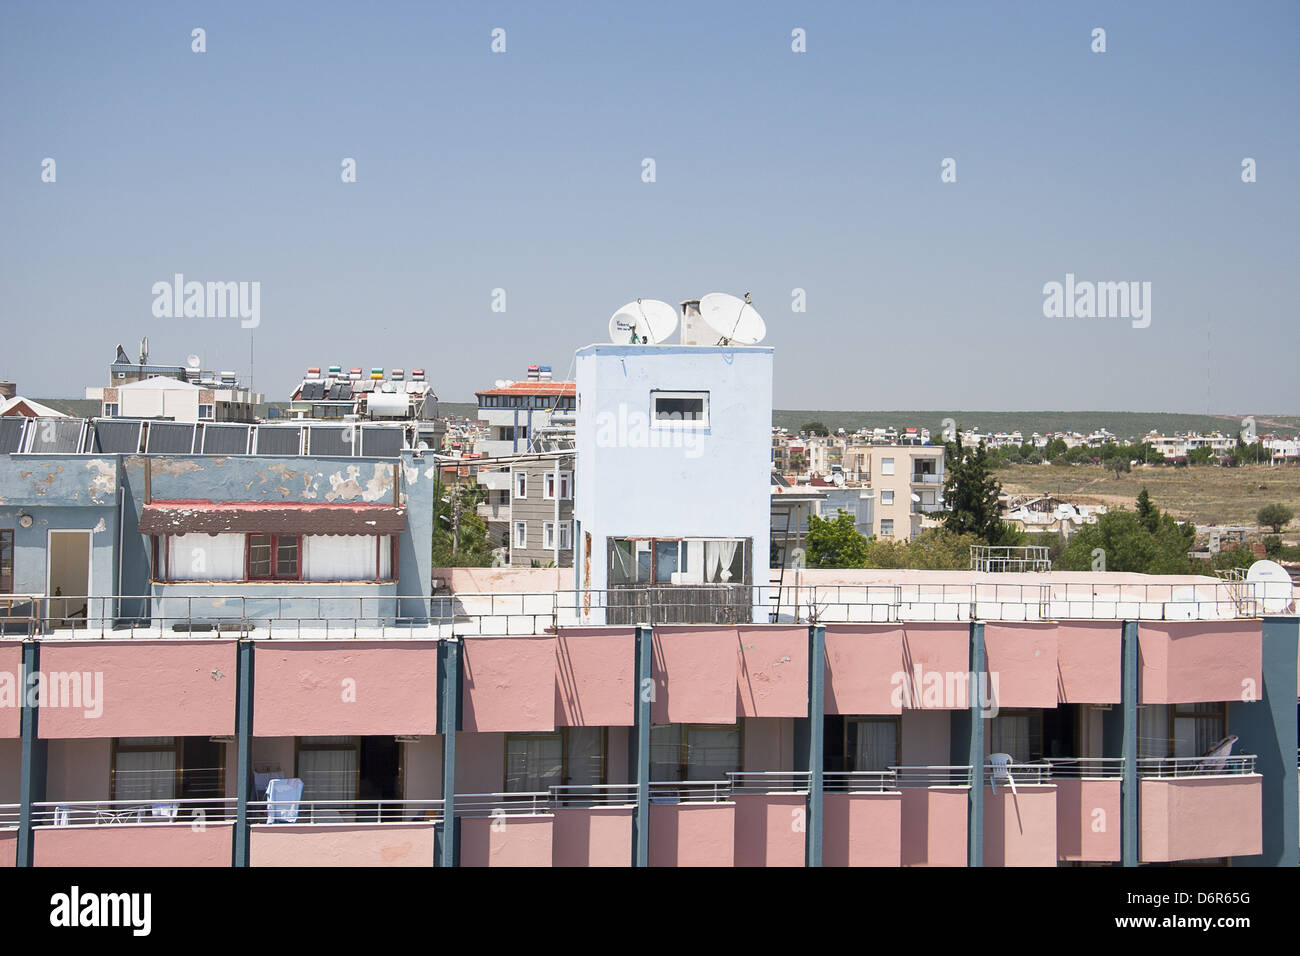 Satellite Dishes on the top of Roofs Stock Photo